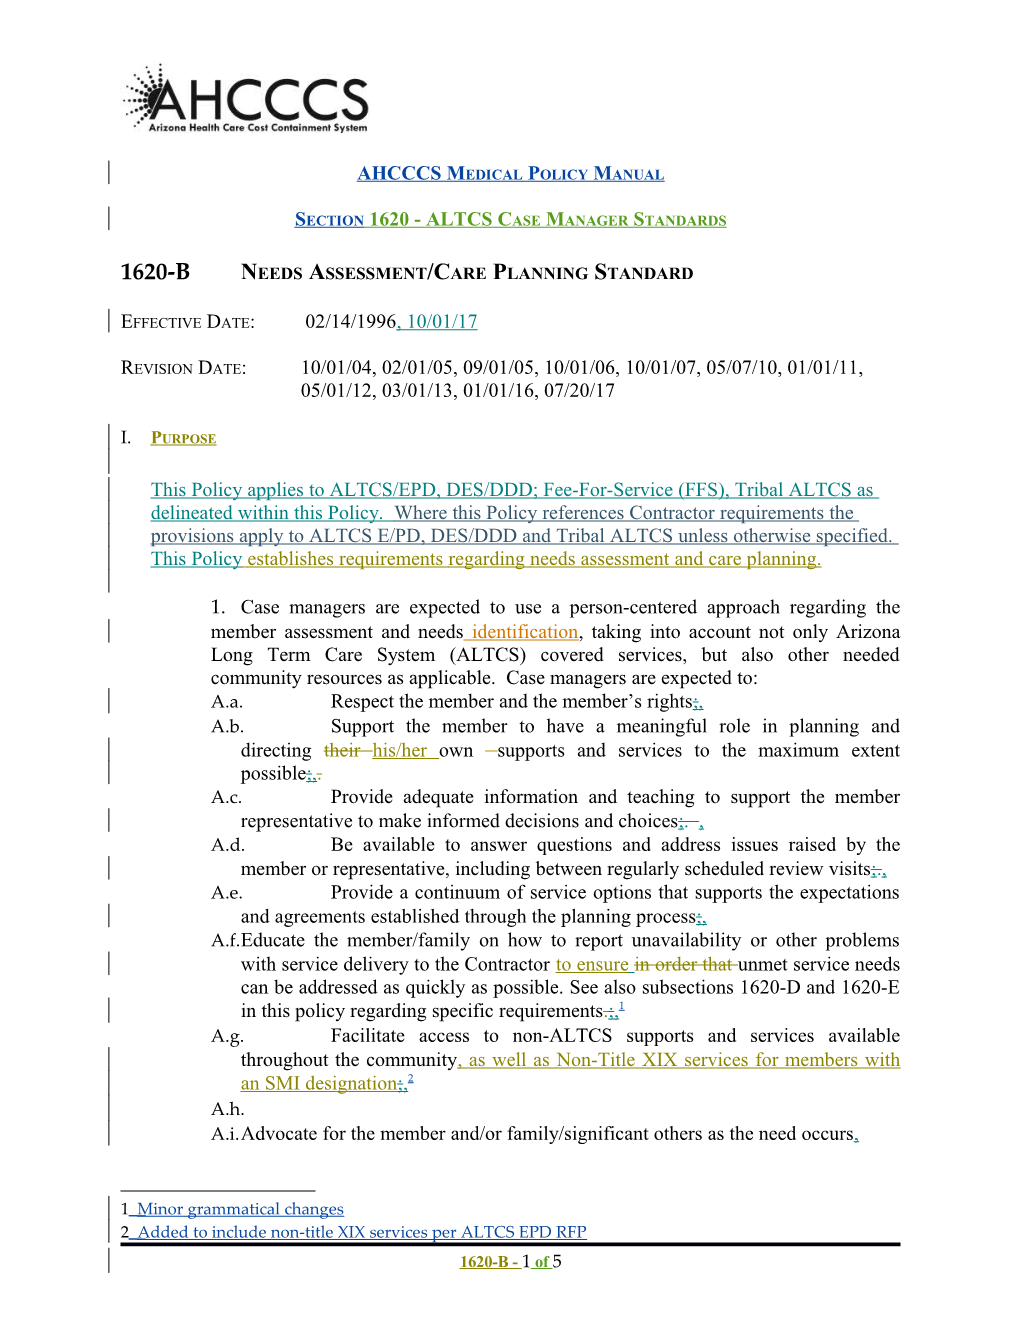 Section 1620 - ALTCS Case Manager Standards